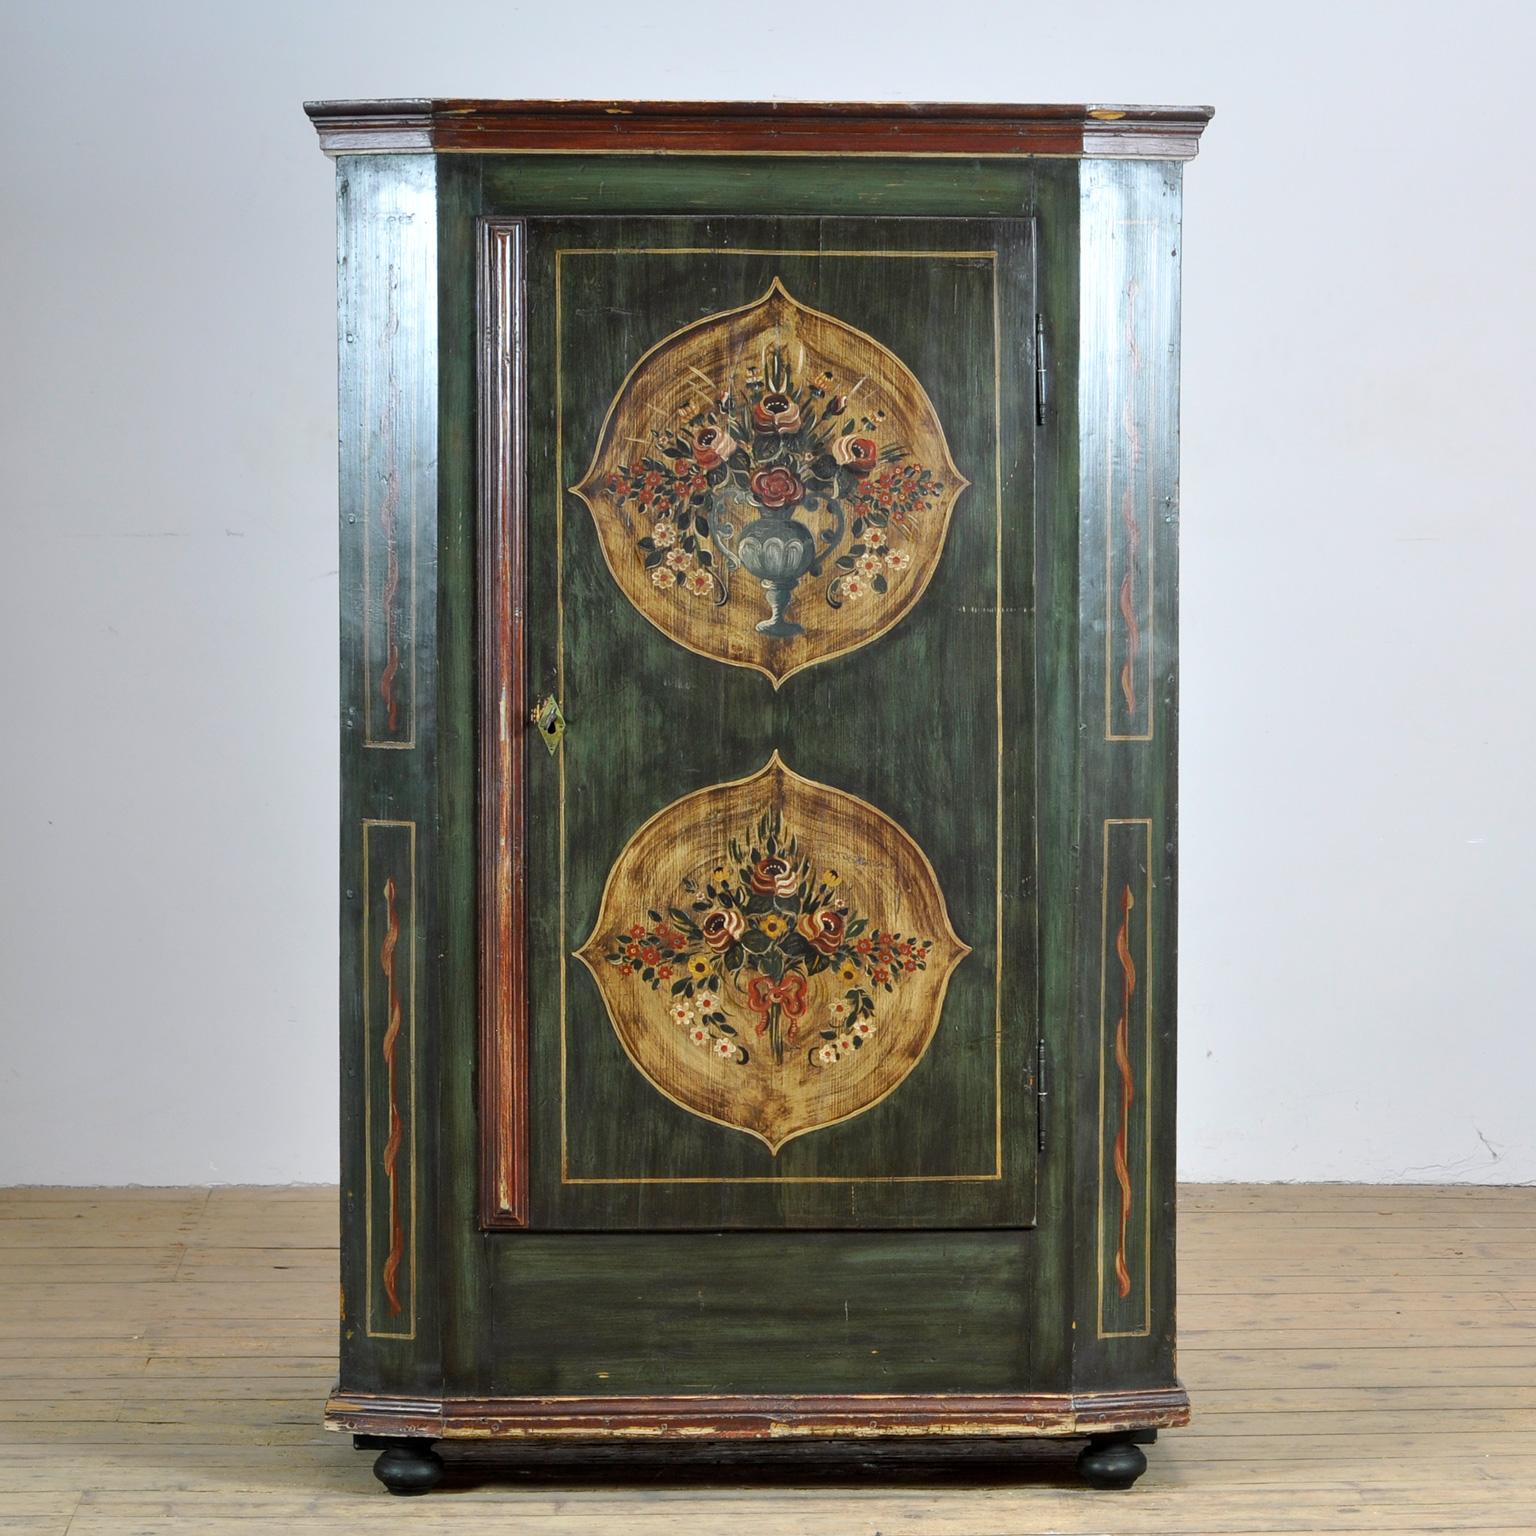 A beautiful cabinet from the rural south of germany, dating from circa 1850. The cabinet was probably given as a wedding present. This cabinet is made of solid pine and is hand painted in vibrant colors. The cabinet has kept its original hinges and